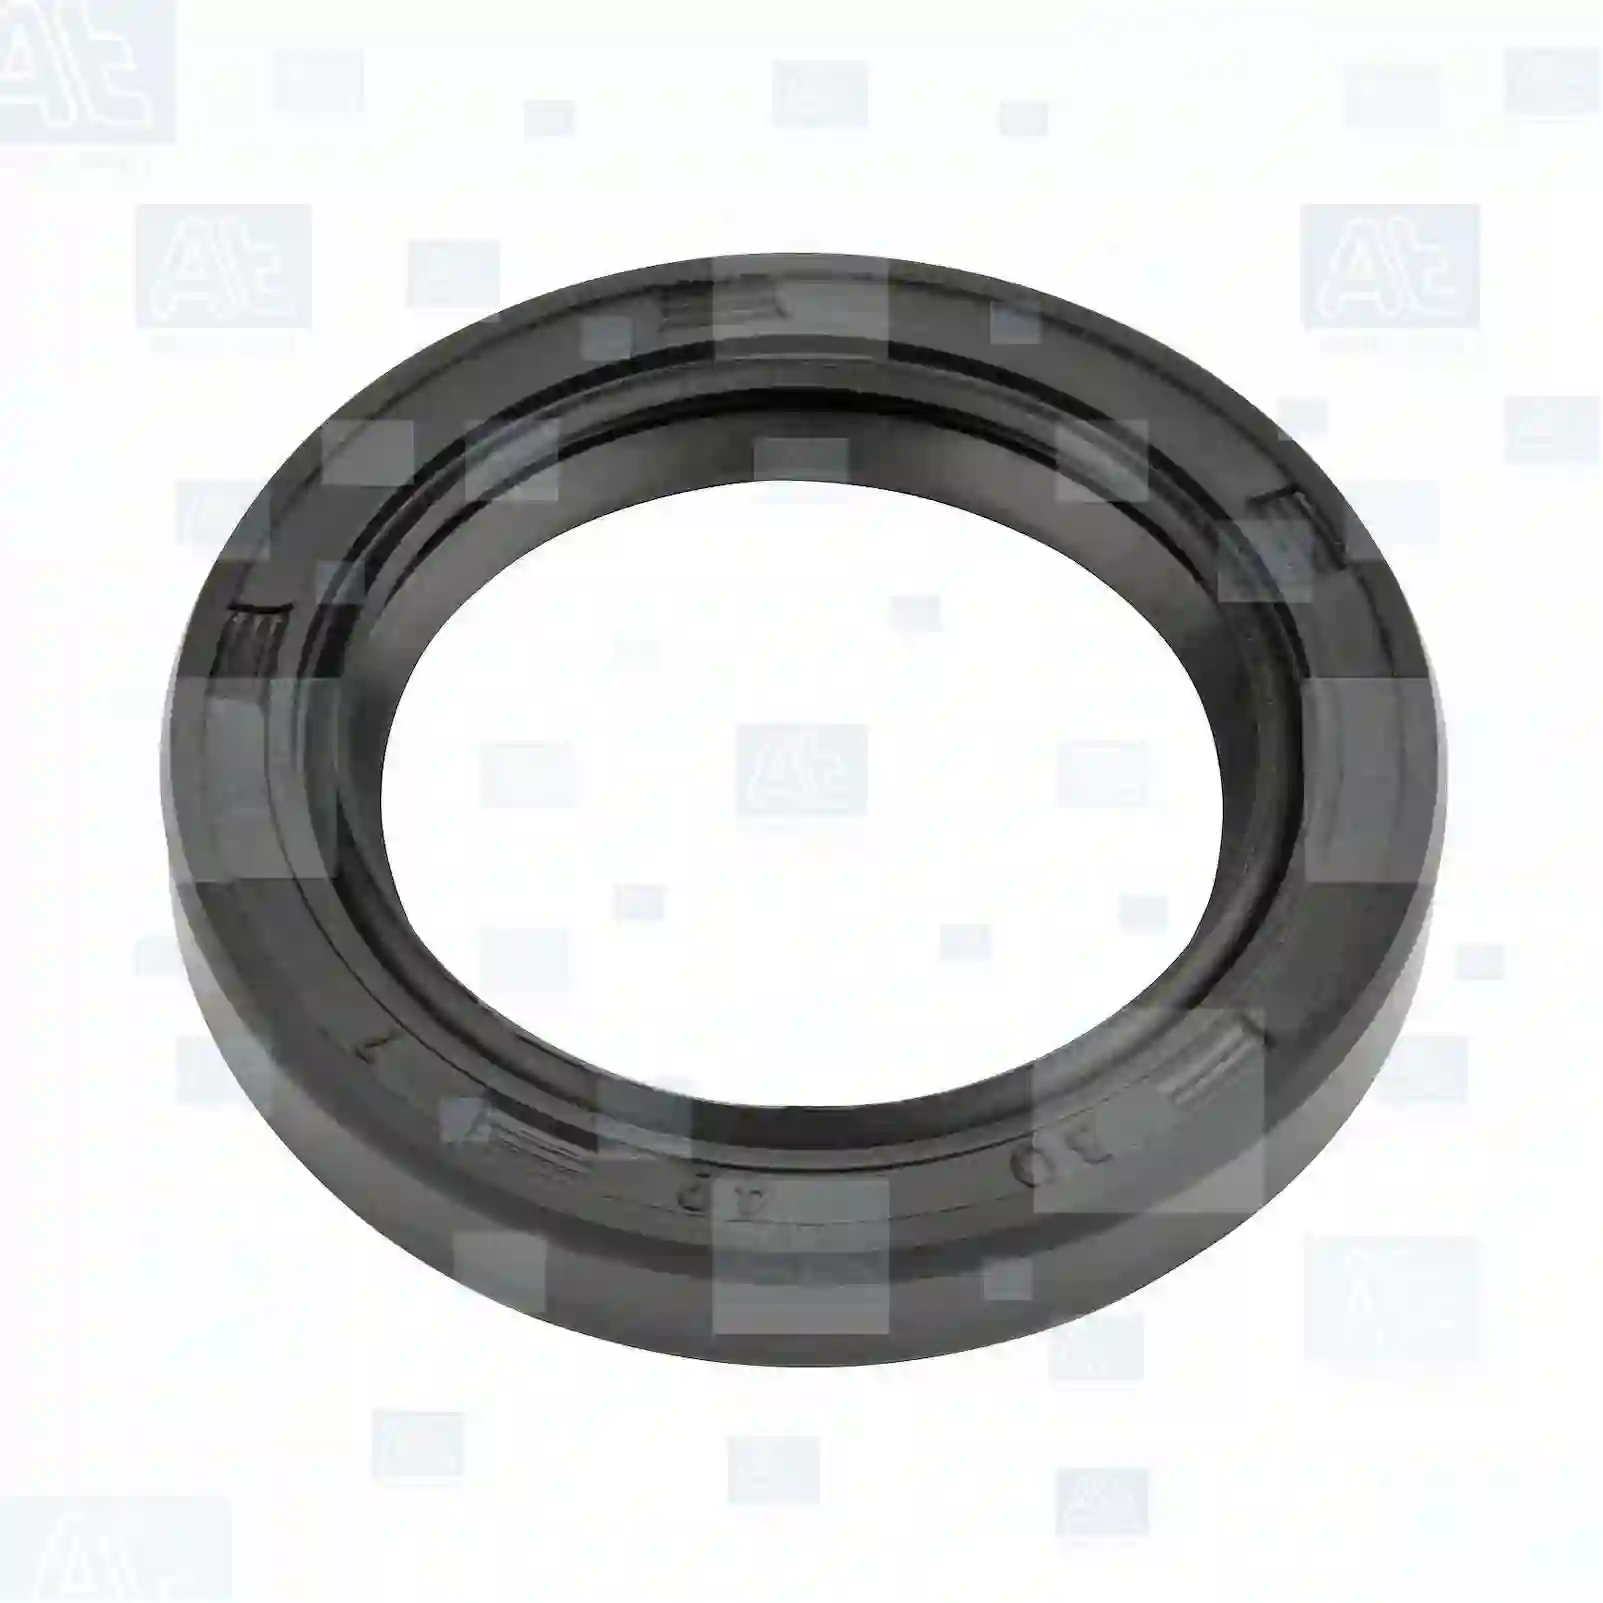 Oil seal, 77721867, 00012012799, 23121201279, 24516606714, 33123004336, 33123004337, 01117627, 01160747, 01160748, 09017609, 09916370, 09920169, 91007370, 01160747, 01160748, 09920169, 01117627, 01160747, 01160748, 06562601912, 0019979746, 003760030102, 0069977647, 006503030102, 0079978847, 1124600161, 687706, 90011201040, 5000273409, 7701027247, 9013843, 1560713 ||  77721867 At Spare Part | Engine, Accelerator Pedal, Camshaft, Connecting Rod, Crankcase, Crankshaft, Cylinder Head, Engine Suspension Mountings, Exhaust Manifold, Exhaust Gas Recirculation, Filter Kits, Flywheel Housing, General Overhaul Kits, Engine, Intake Manifold, Oil Cleaner, Oil Cooler, Oil Filter, Oil Pump, Oil Sump, Piston & Liner, Sensor & Switch, Timing Case, Turbocharger, Cooling System, Belt Tensioner, Coolant Filter, Coolant Pipe, Corrosion Prevention Agent, Drive, Expansion Tank, Fan, Intercooler, Monitors & Gauges, Radiator, Thermostat, V-Belt / Timing belt, Water Pump, Fuel System, Electronical Injector Unit, Feed Pump, Fuel Filter, cpl., Fuel Gauge Sender,  Fuel Line, Fuel Pump, Fuel Tank, Injection Line Kit, Injection Pump, Exhaust System, Clutch & Pedal, Gearbox, Propeller Shaft, Axles, Brake System, Hubs & Wheels, Suspension, Leaf Spring, Universal Parts / Accessories, Steering, Electrical System, Cabin Oil seal, 77721867, 00012012799, 23121201279, 24516606714, 33123004336, 33123004337, 01117627, 01160747, 01160748, 09017609, 09916370, 09920169, 91007370, 01160747, 01160748, 09920169, 01117627, 01160747, 01160748, 06562601912, 0019979746, 003760030102, 0069977647, 006503030102, 0079978847, 1124600161, 687706, 90011201040, 5000273409, 7701027247, 9013843, 1560713 ||  77721867 At Spare Part | Engine, Accelerator Pedal, Camshaft, Connecting Rod, Crankcase, Crankshaft, Cylinder Head, Engine Suspension Mountings, Exhaust Manifold, Exhaust Gas Recirculation, Filter Kits, Flywheel Housing, General Overhaul Kits, Engine, Intake Manifold, Oil Cleaner, Oil Cooler, Oil Filter, Oil Pump, Oil Sump, Piston & Liner, Sensor & Switch, Timing Case, Turbocharger, Cooling System, Belt Tensioner, Coolant Filter, Coolant Pipe, Corrosion Prevention Agent, Drive, Expansion Tank, Fan, Intercooler, Monitors & Gauges, Radiator, Thermostat, V-Belt / Timing belt, Water Pump, Fuel System, Electronical Injector Unit, Feed Pump, Fuel Filter, cpl., Fuel Gauge Sender,  Fuel Line, Fuel Pump, Fuel Tank, Injection Line Kit, Injection Pump, Exhaust System, Clutch & Pedal, Gearbox, Propeller Shaft, Axles, Brake System, Hubs & Wheels, Suspension, Leaf Spring, Universal Parts / Accessories, Steering, Electrical System, Cabin